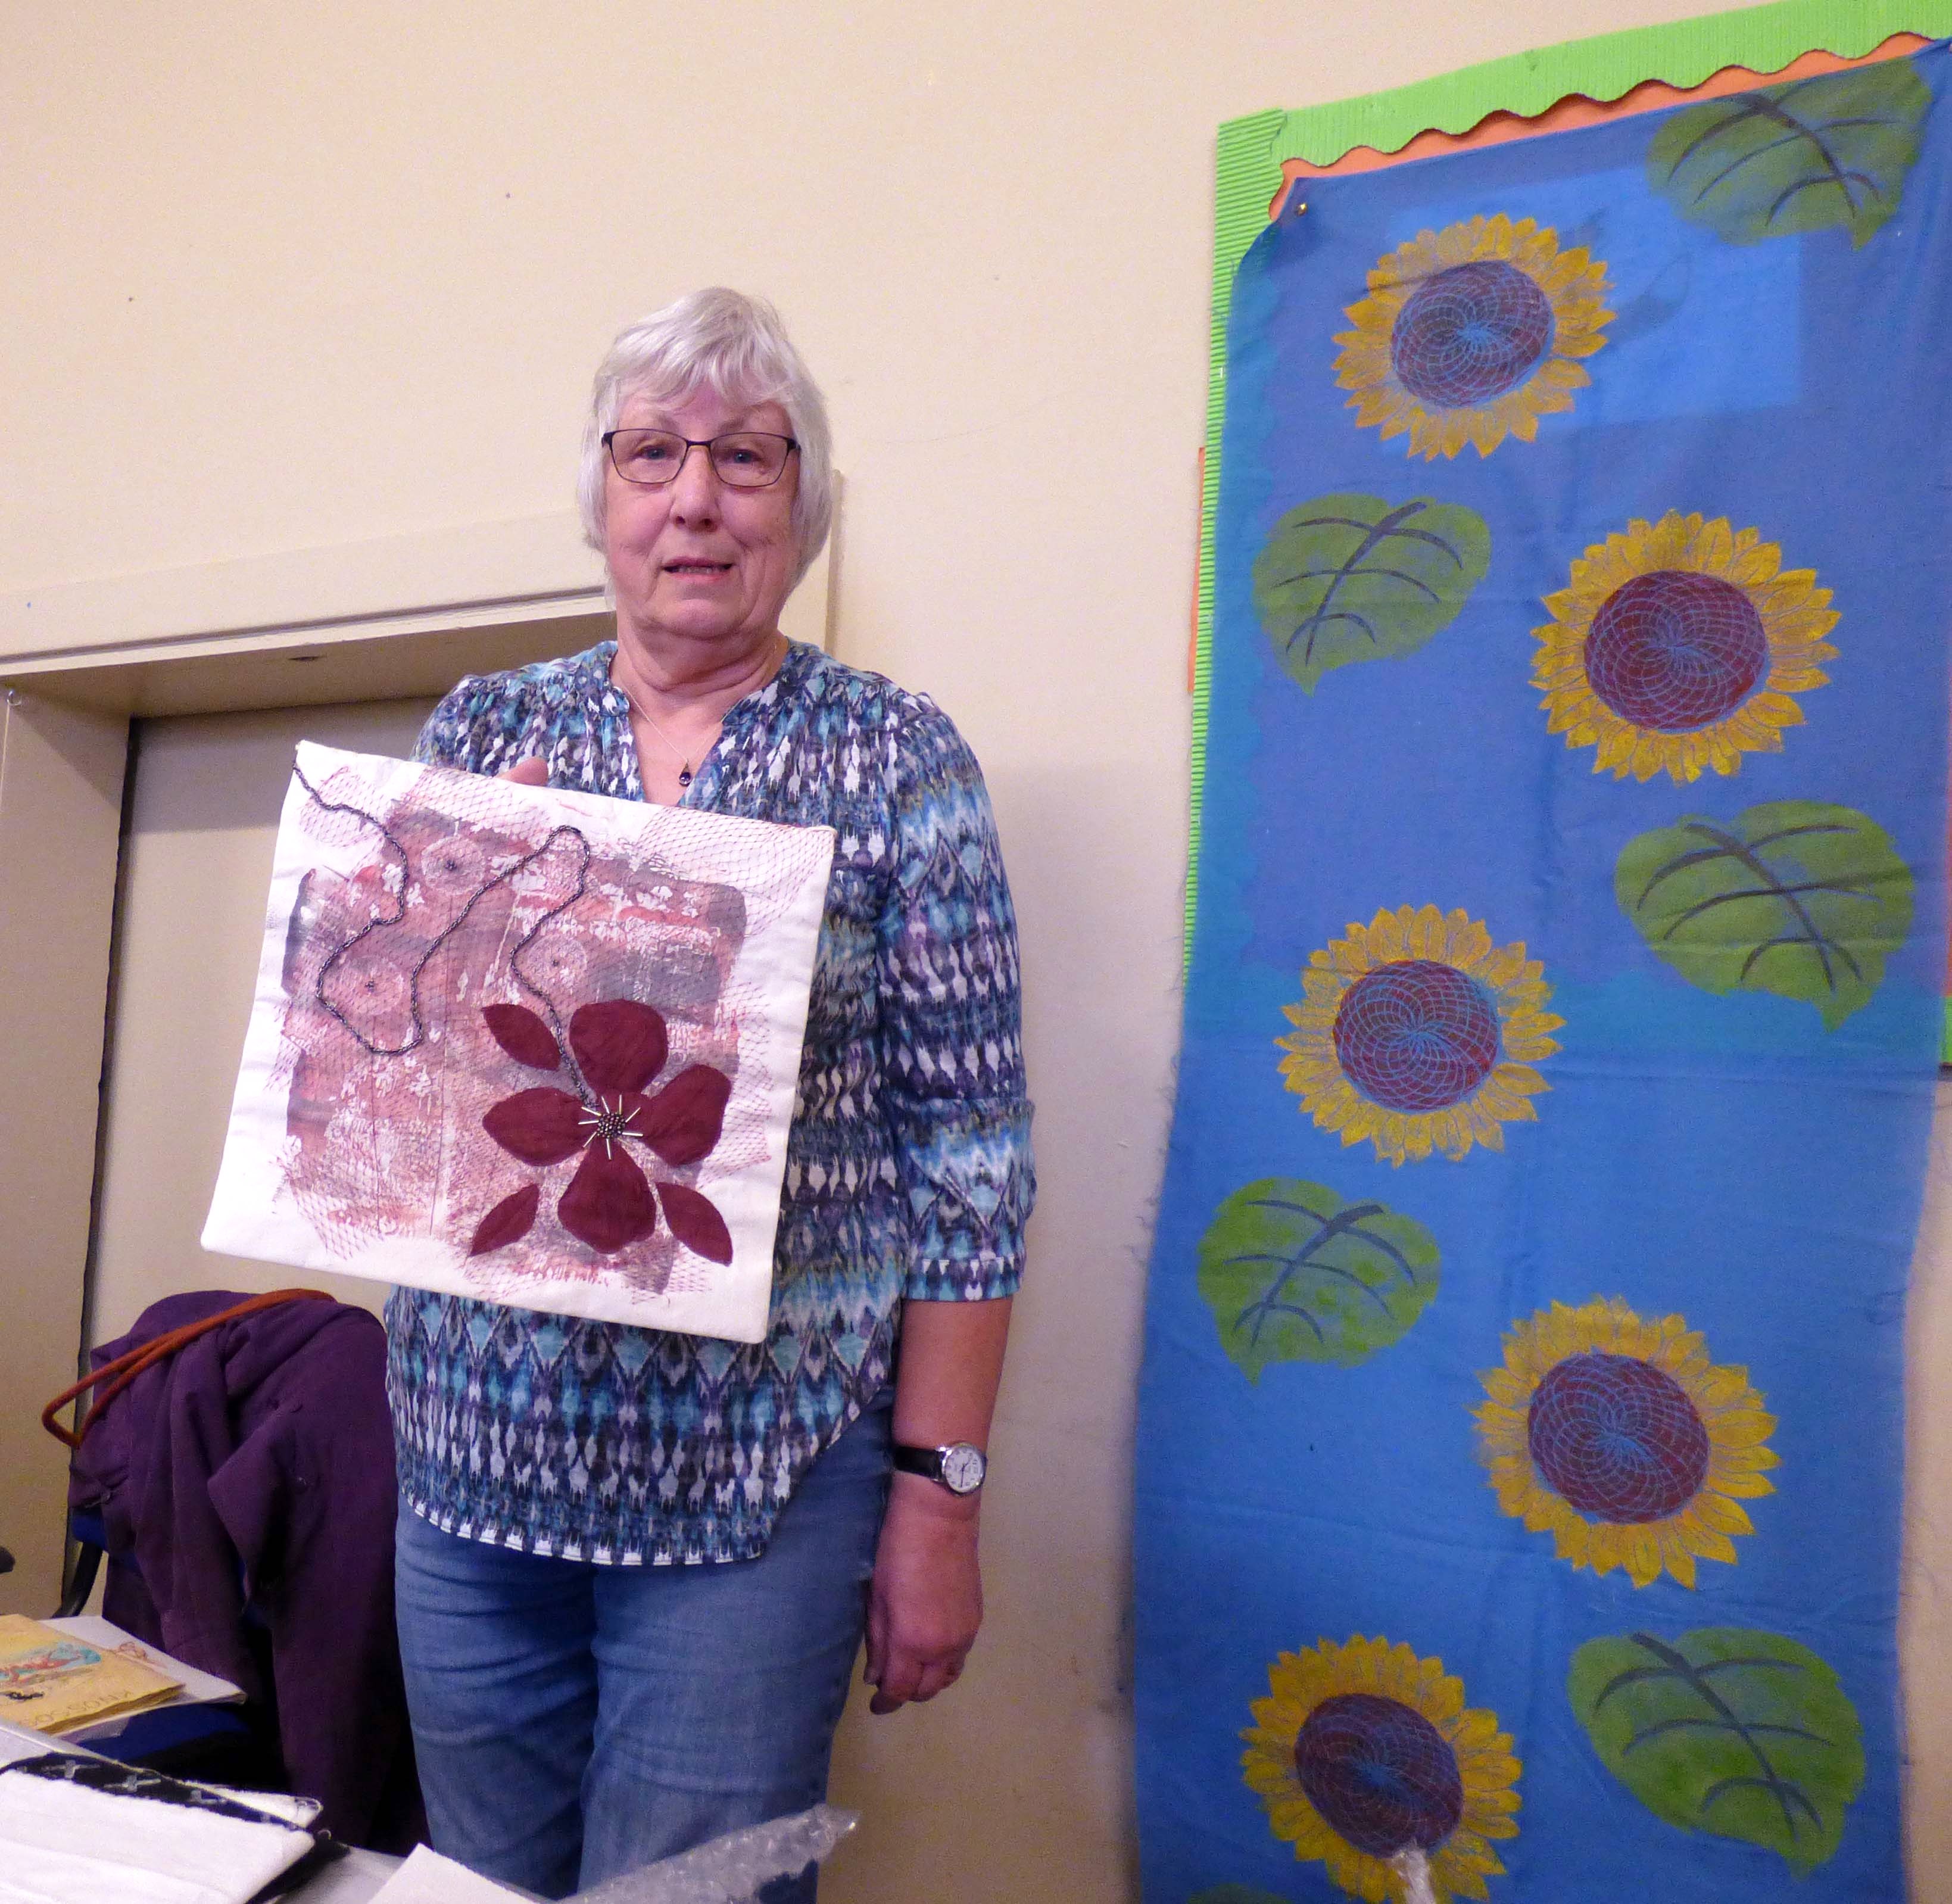 Ann Cornes with some of her prints, "From Plain to Printed" print Workshop with Anne Cornes, April 2019